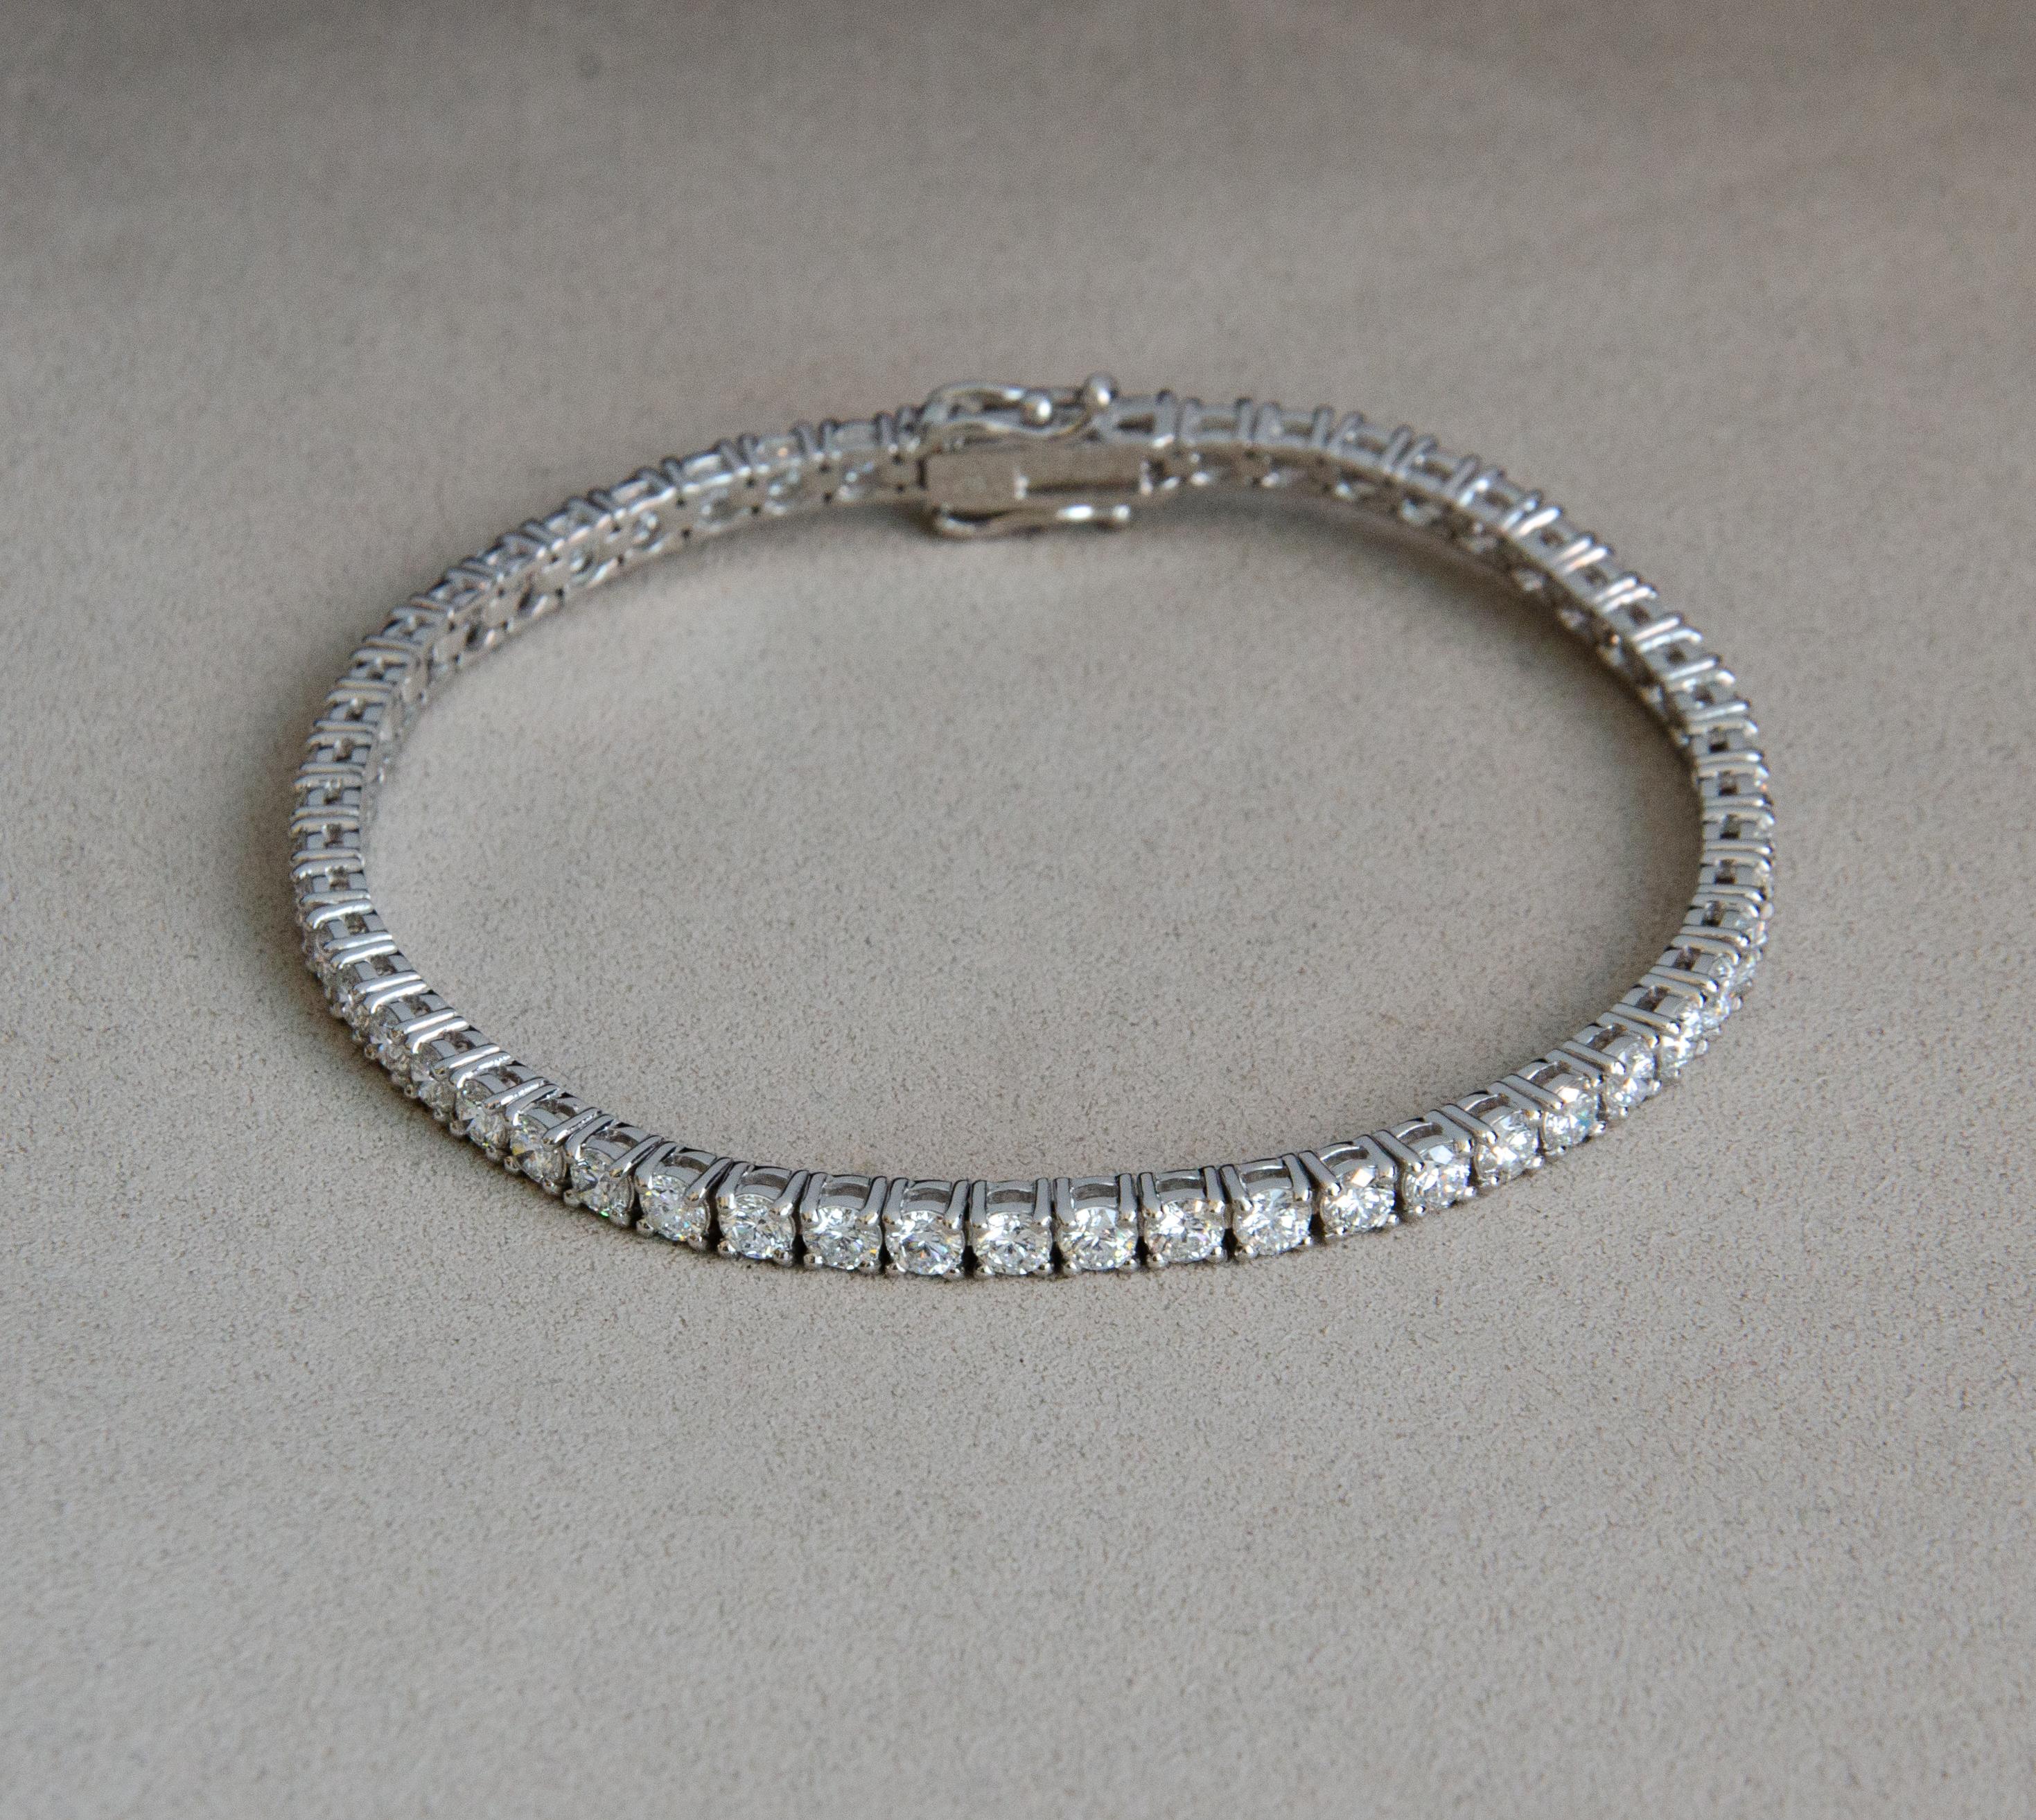 Ruth Nyc, 5.00ctw Tennis Bracelet in 14k White Gold For Sale 1